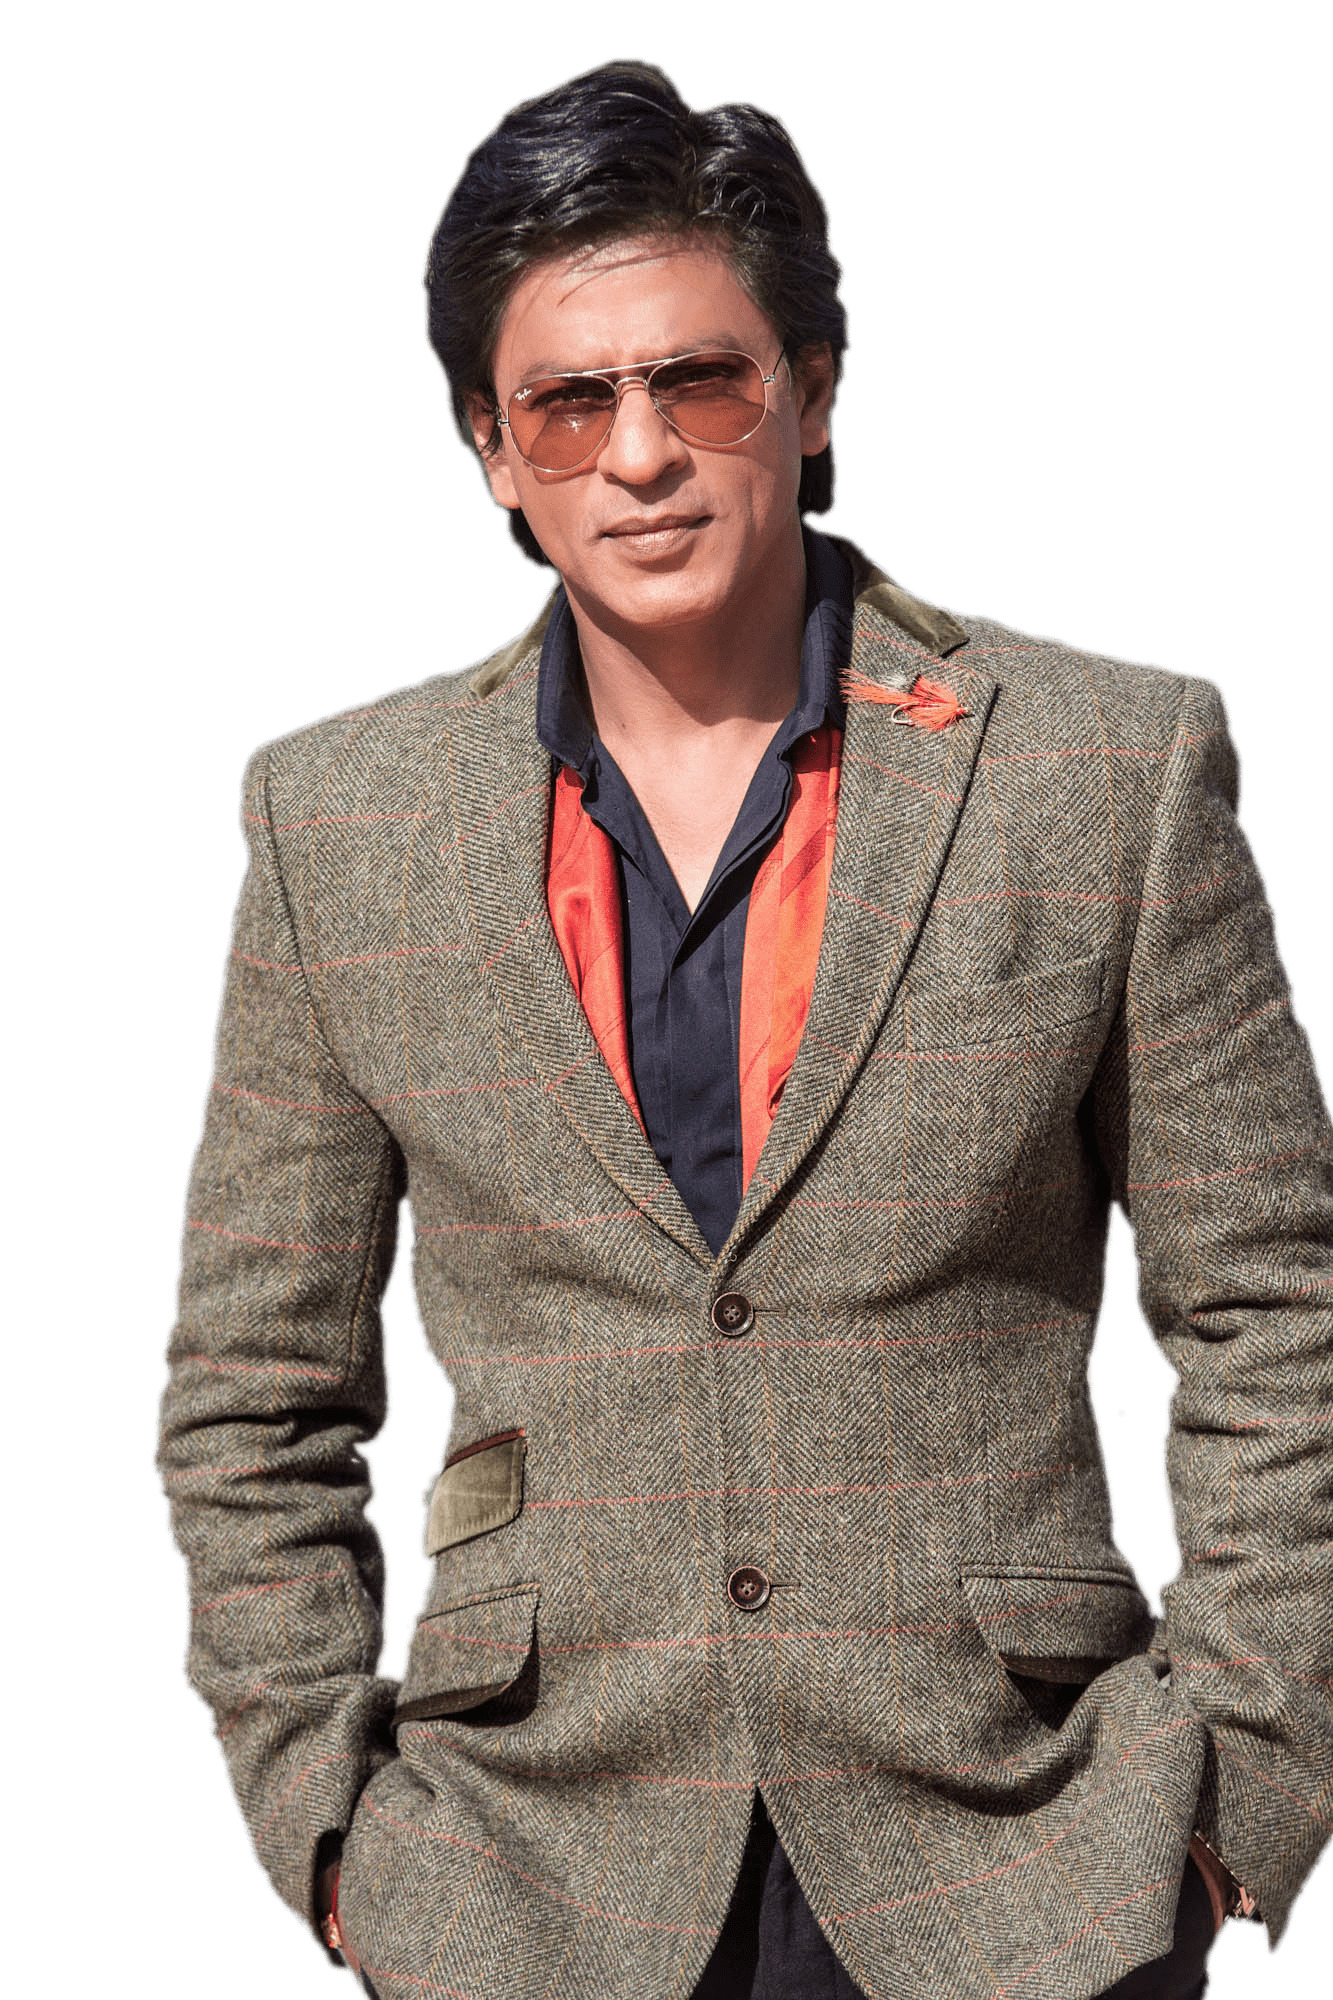 Can Shah Rukh Khan be our Prime Minister? | Mint Lounge